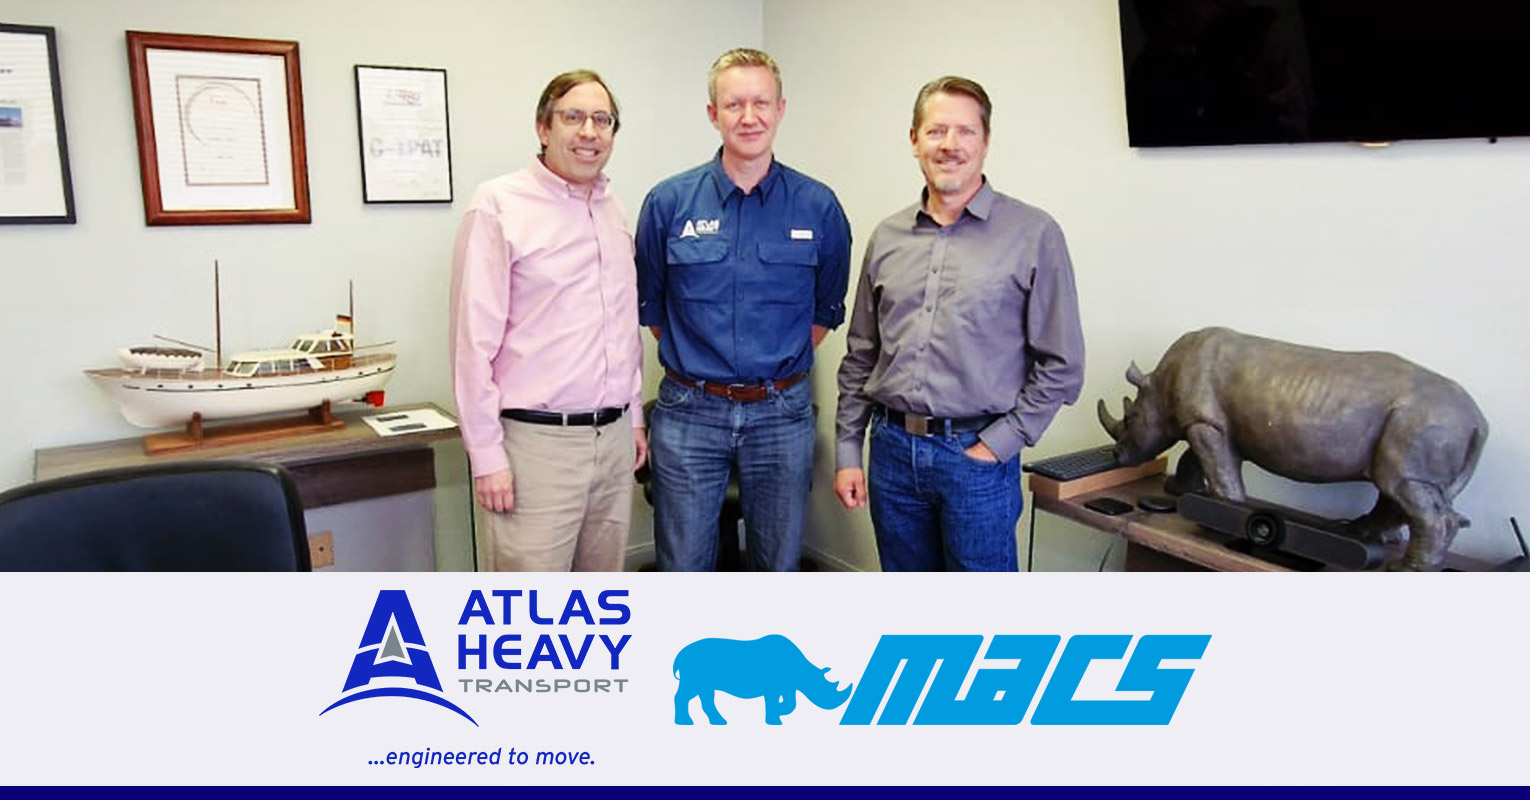 Atlas Heavy Transport (CLC Projects Service Provider) meeting with MACS